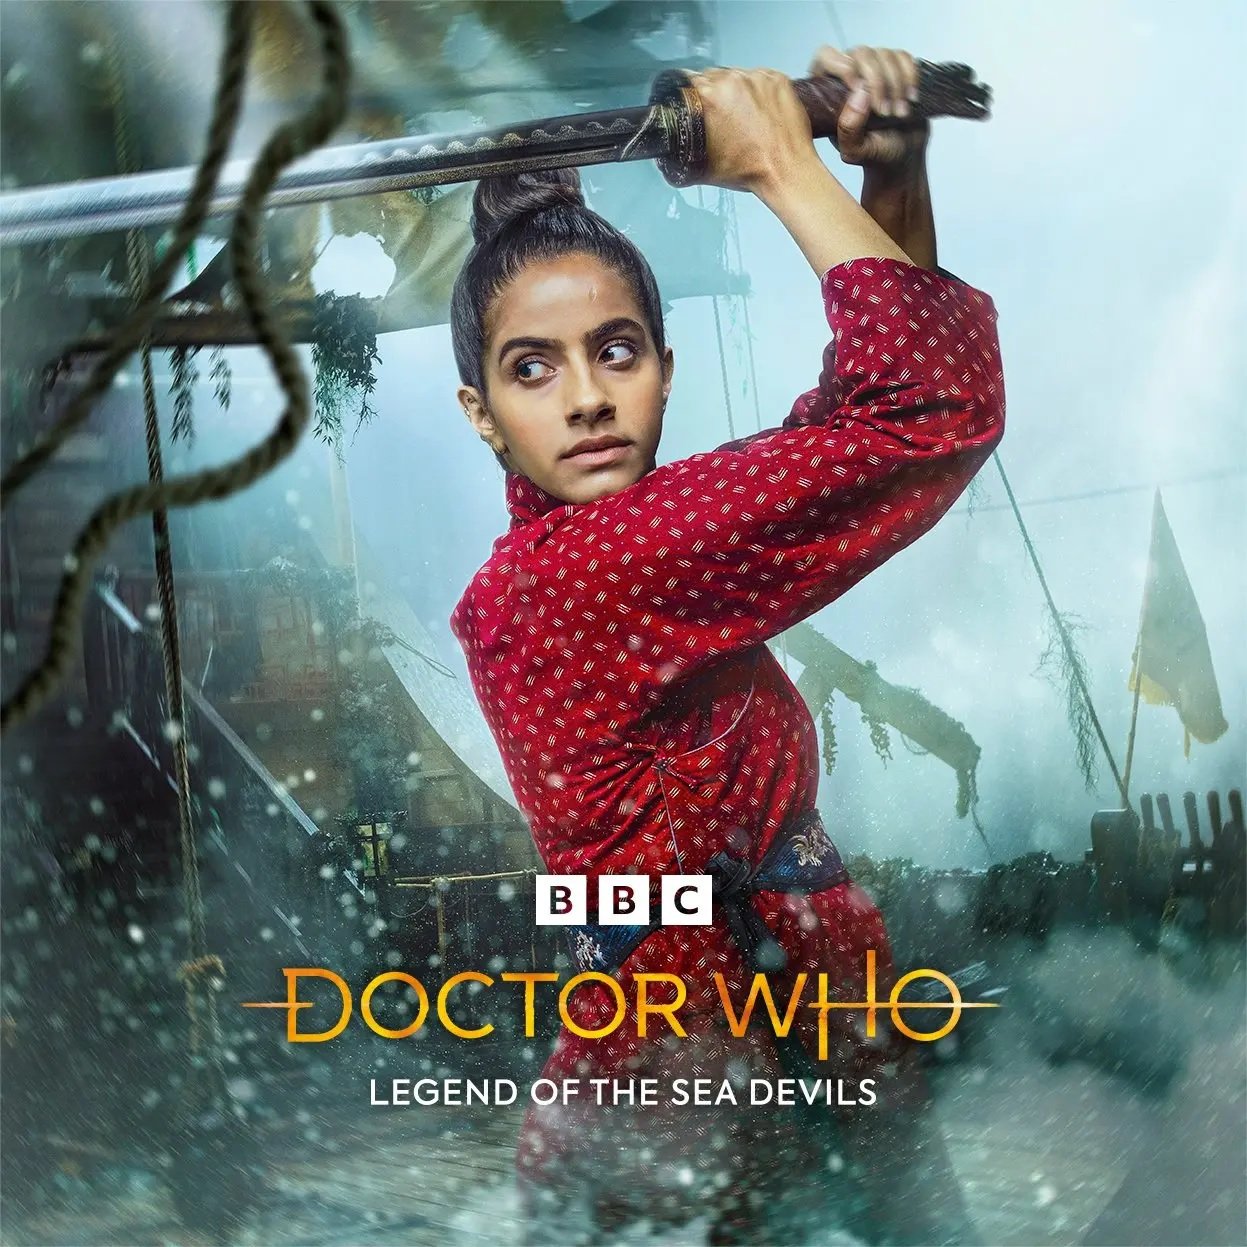 Legend of the Sea Devils: Mandip Gill Teases a “Jam-Packed Epic” with “a Story of Love at the Center”